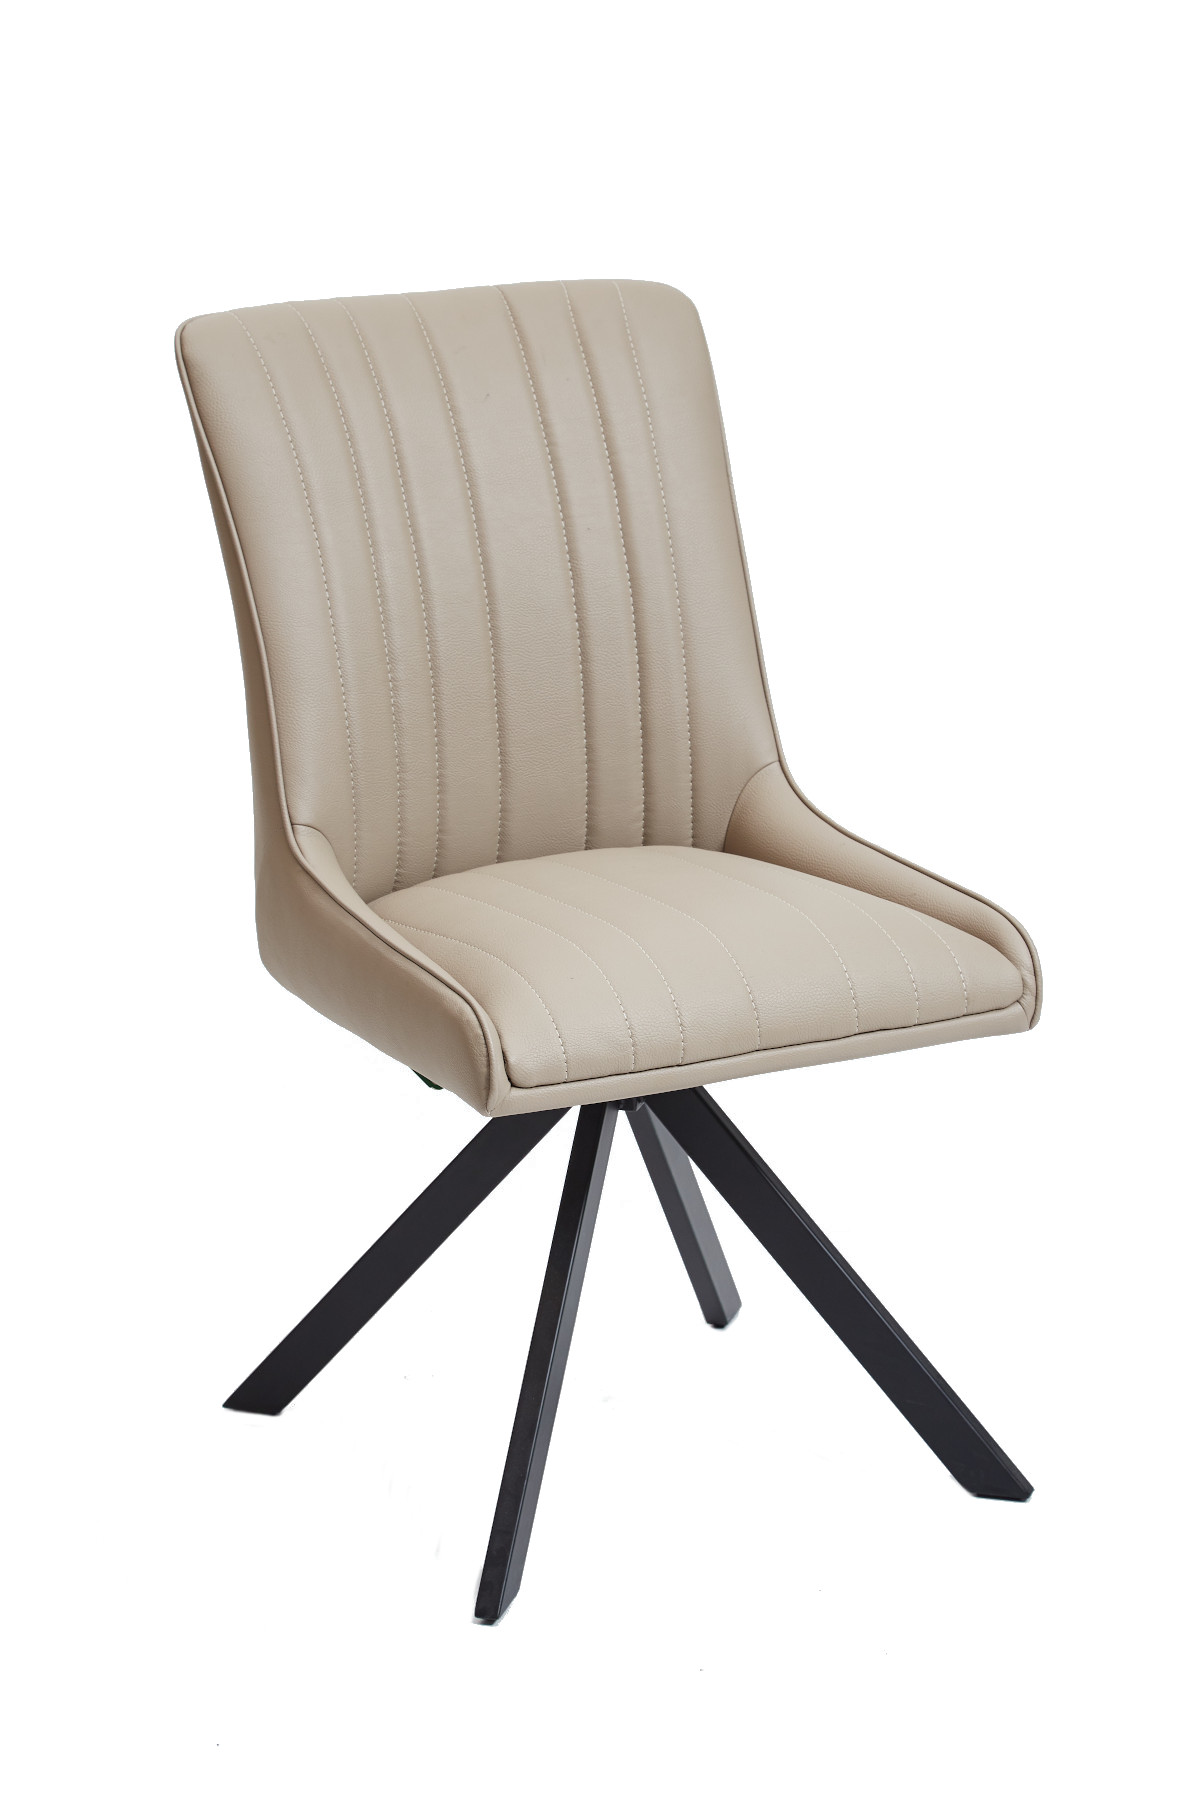 Shauna Taupe Dining Chair